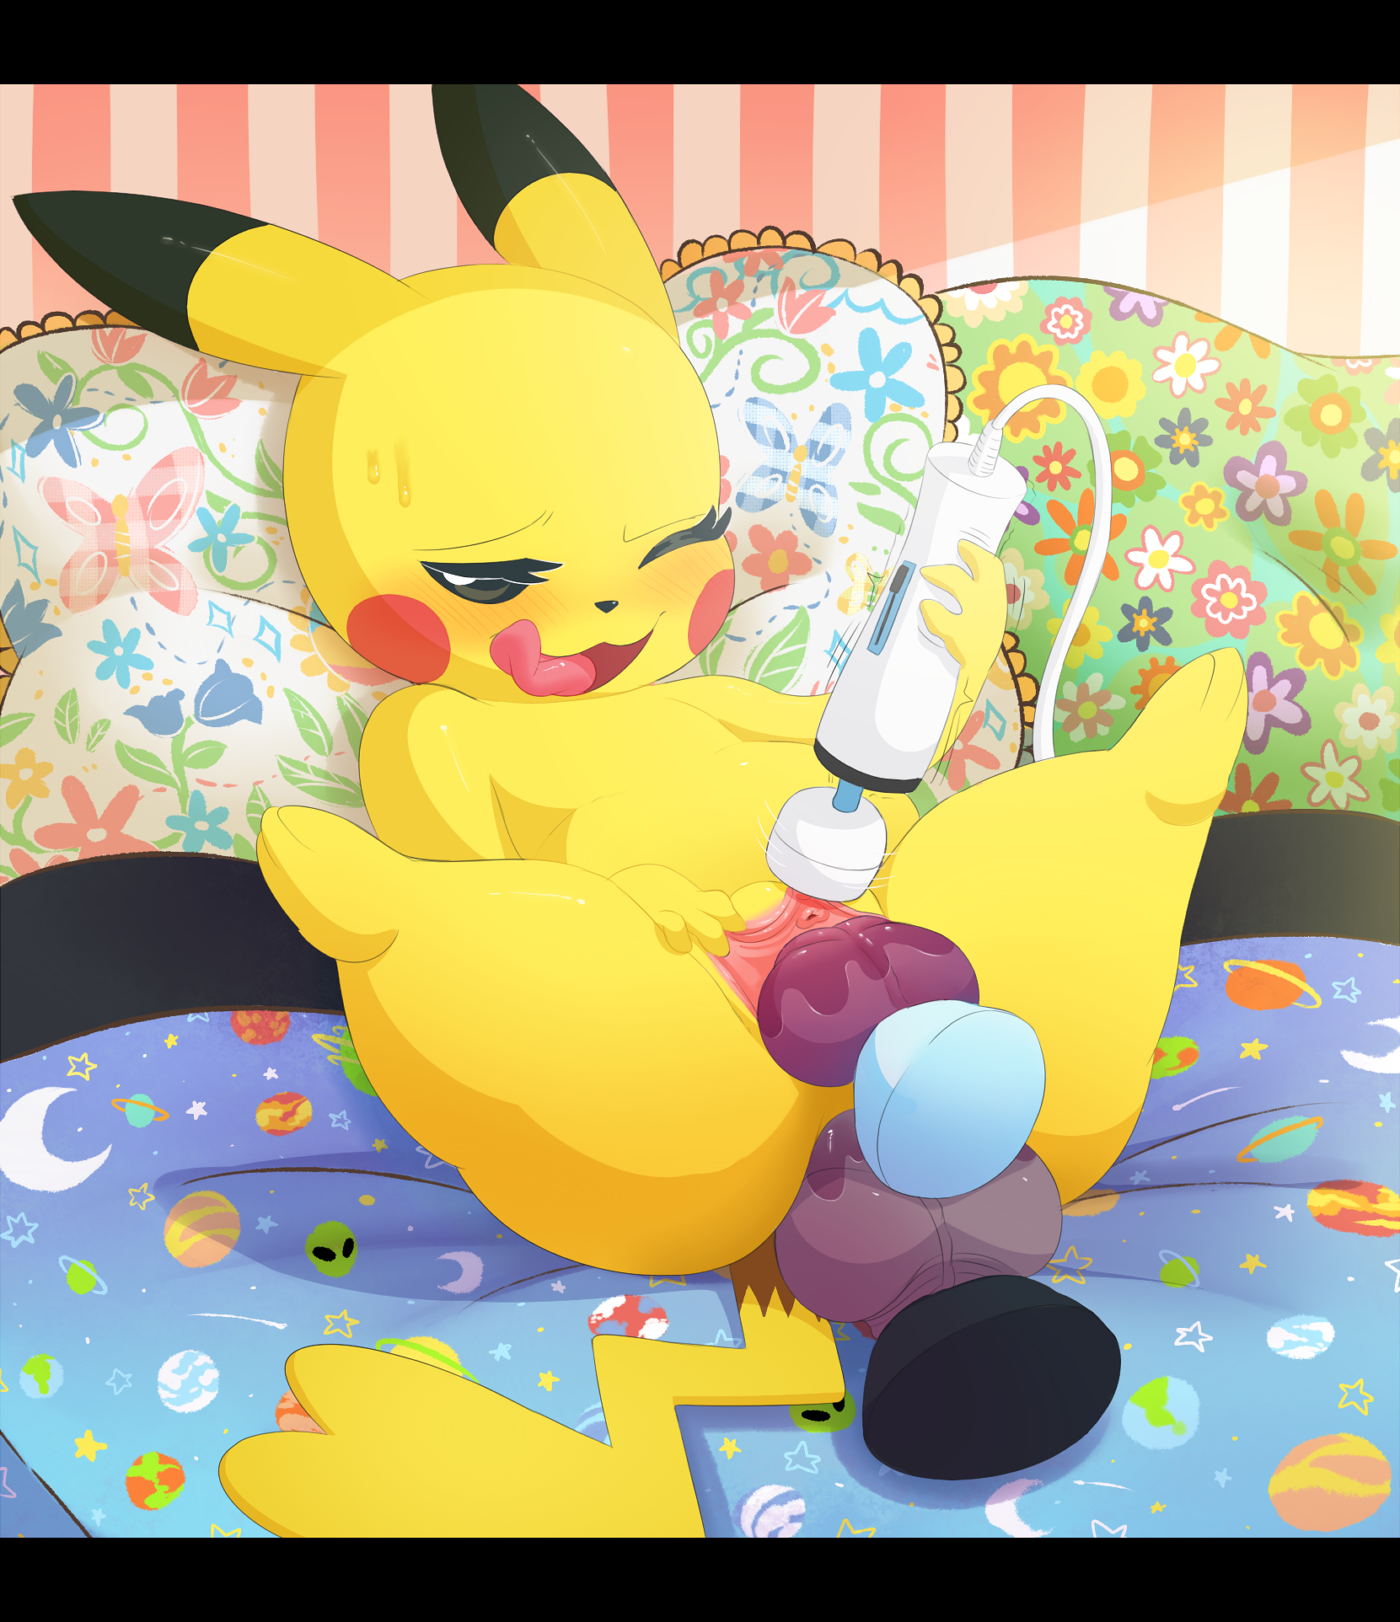 [F] Pikachu trying out several toys